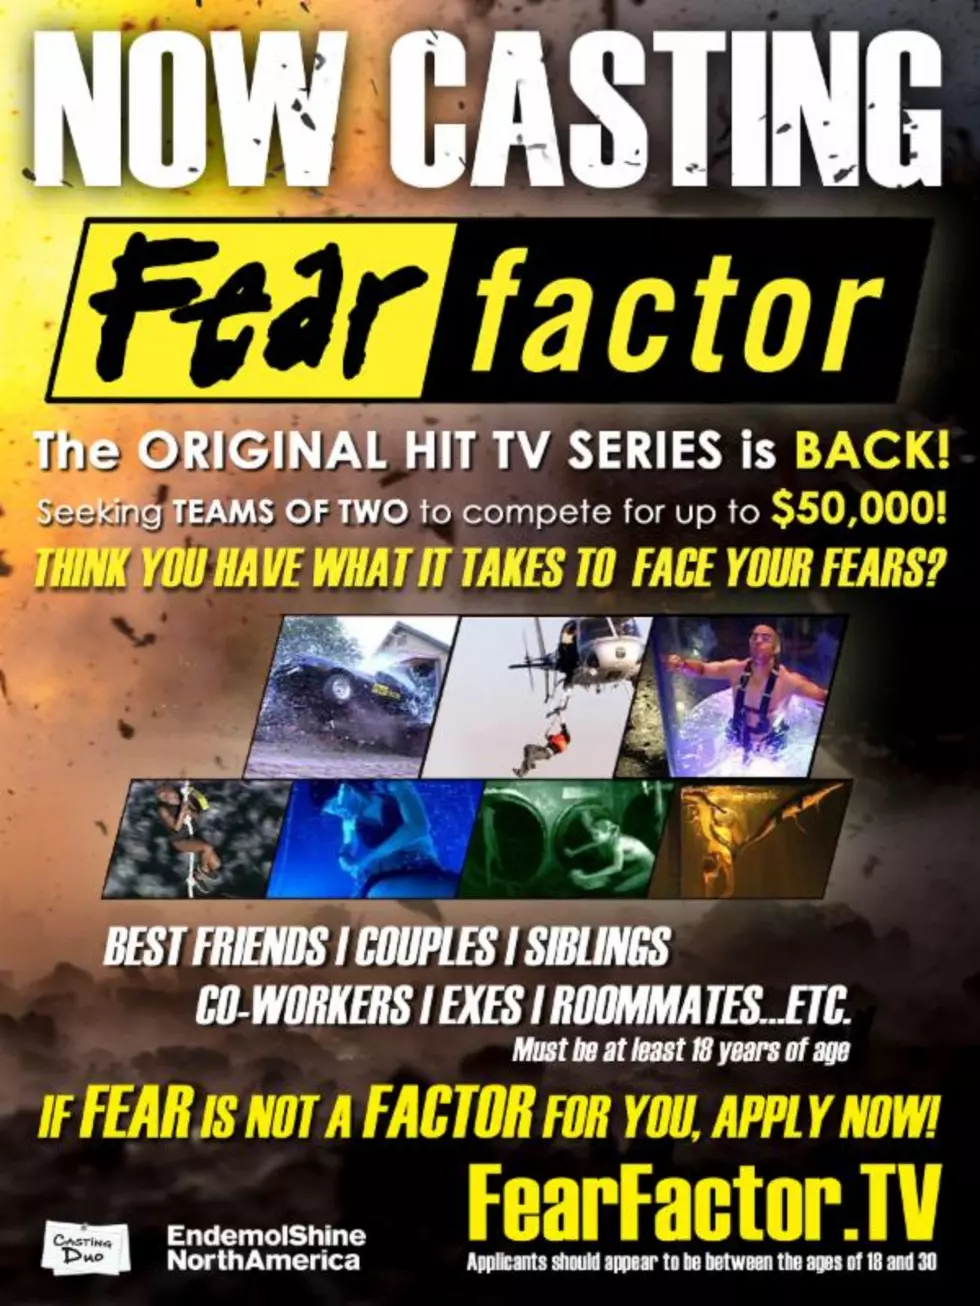 Auditions for TV’s Fear Factor